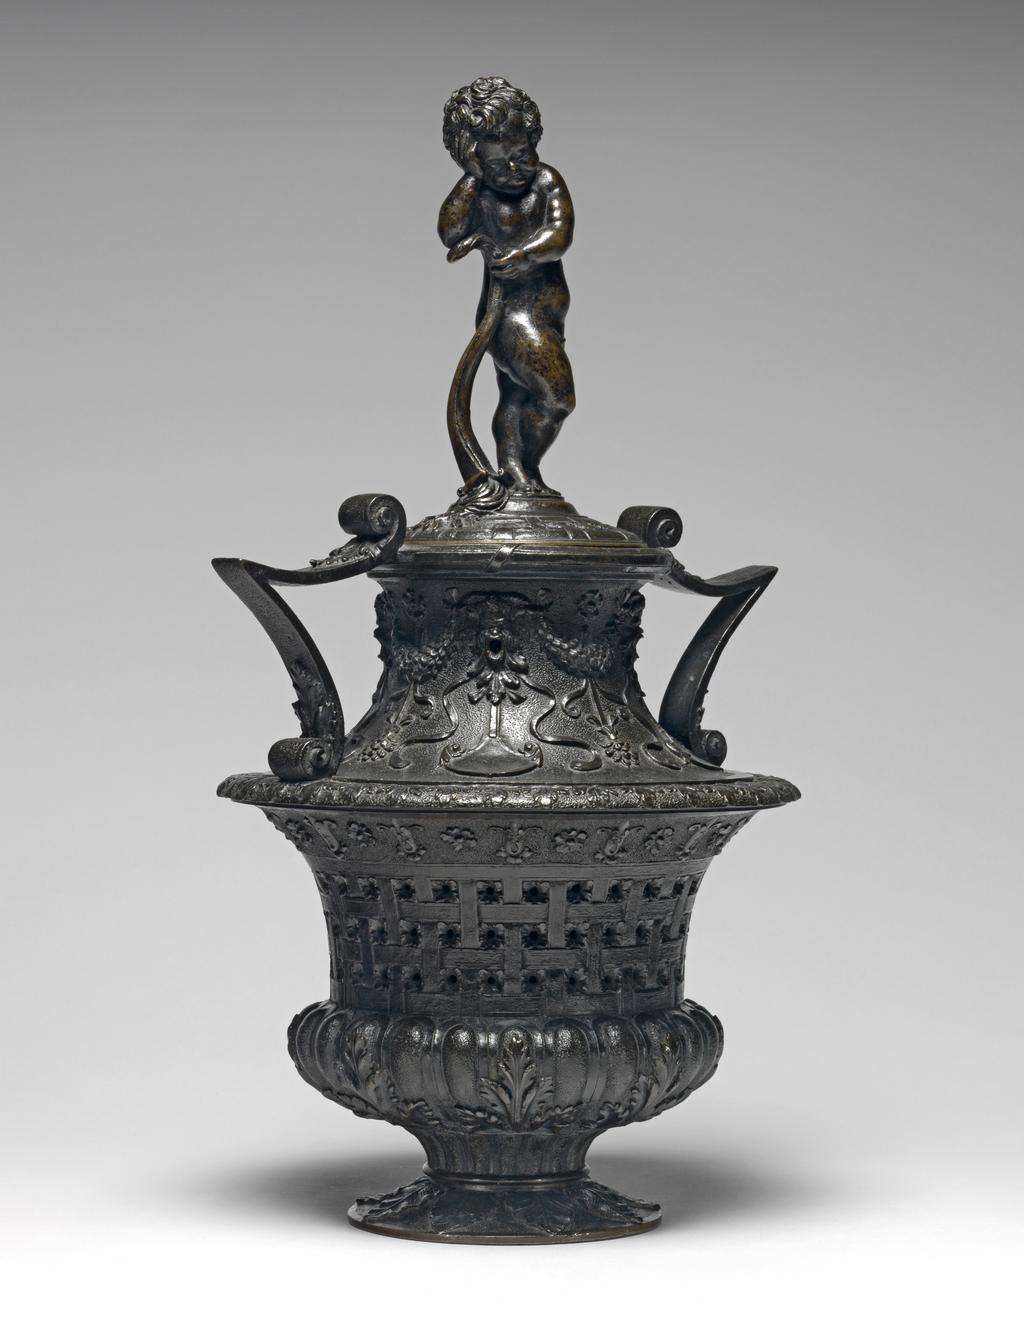 An image of Cassolette and cover with a funerary genius. Vincenzio Grandi (Italian sculptor, 1493-1577/78), and/or Gian Girolama Grandi (Italian, 1508-1560). Vase-shaped, with pierced sides, and two v-shaped handles, the cover surmounted by a standing putto leaning on an extinguished torch. Copper alloy, probably bronze, cast, height, whole, 34.1, cm, 1530-1560. Renaissance.